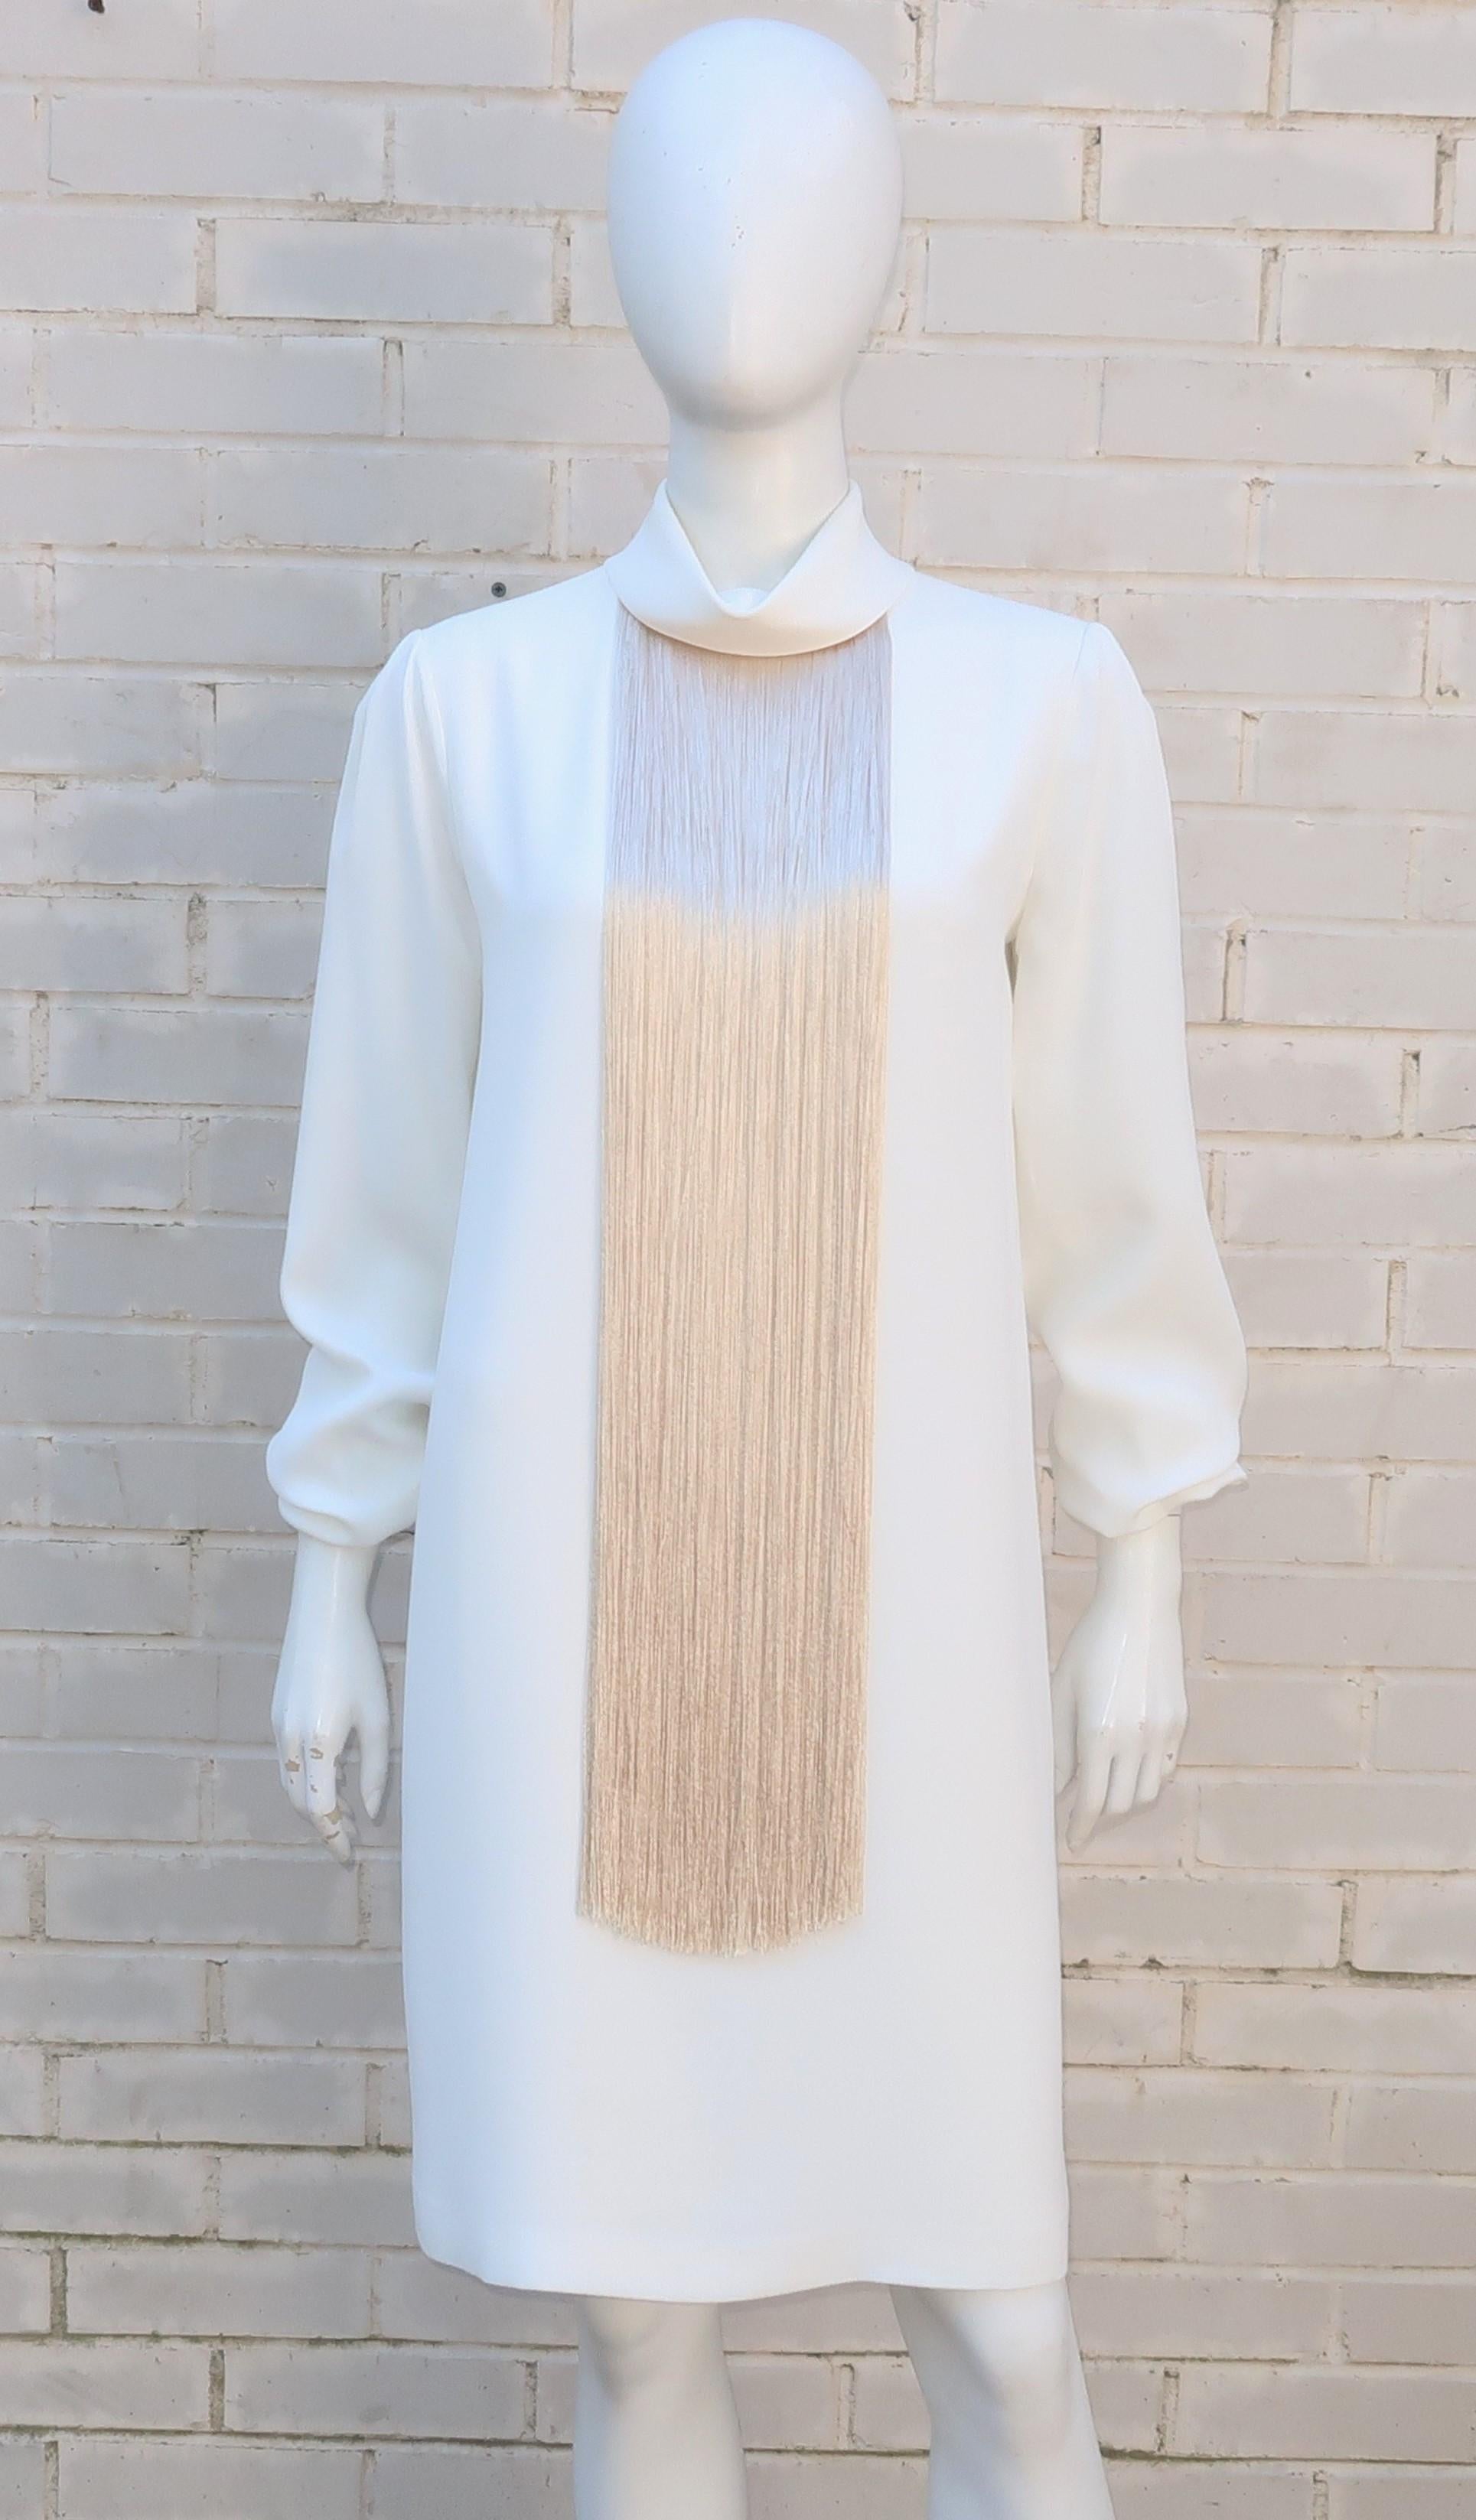 Adam Lippes creates a chic ivory cocktail dress with an effortless silhouette accented by a striking long fringe neckline in a golden champagne color.  The dress fabric is a combination of acetate and viscose that has the weight, drape and feel of a